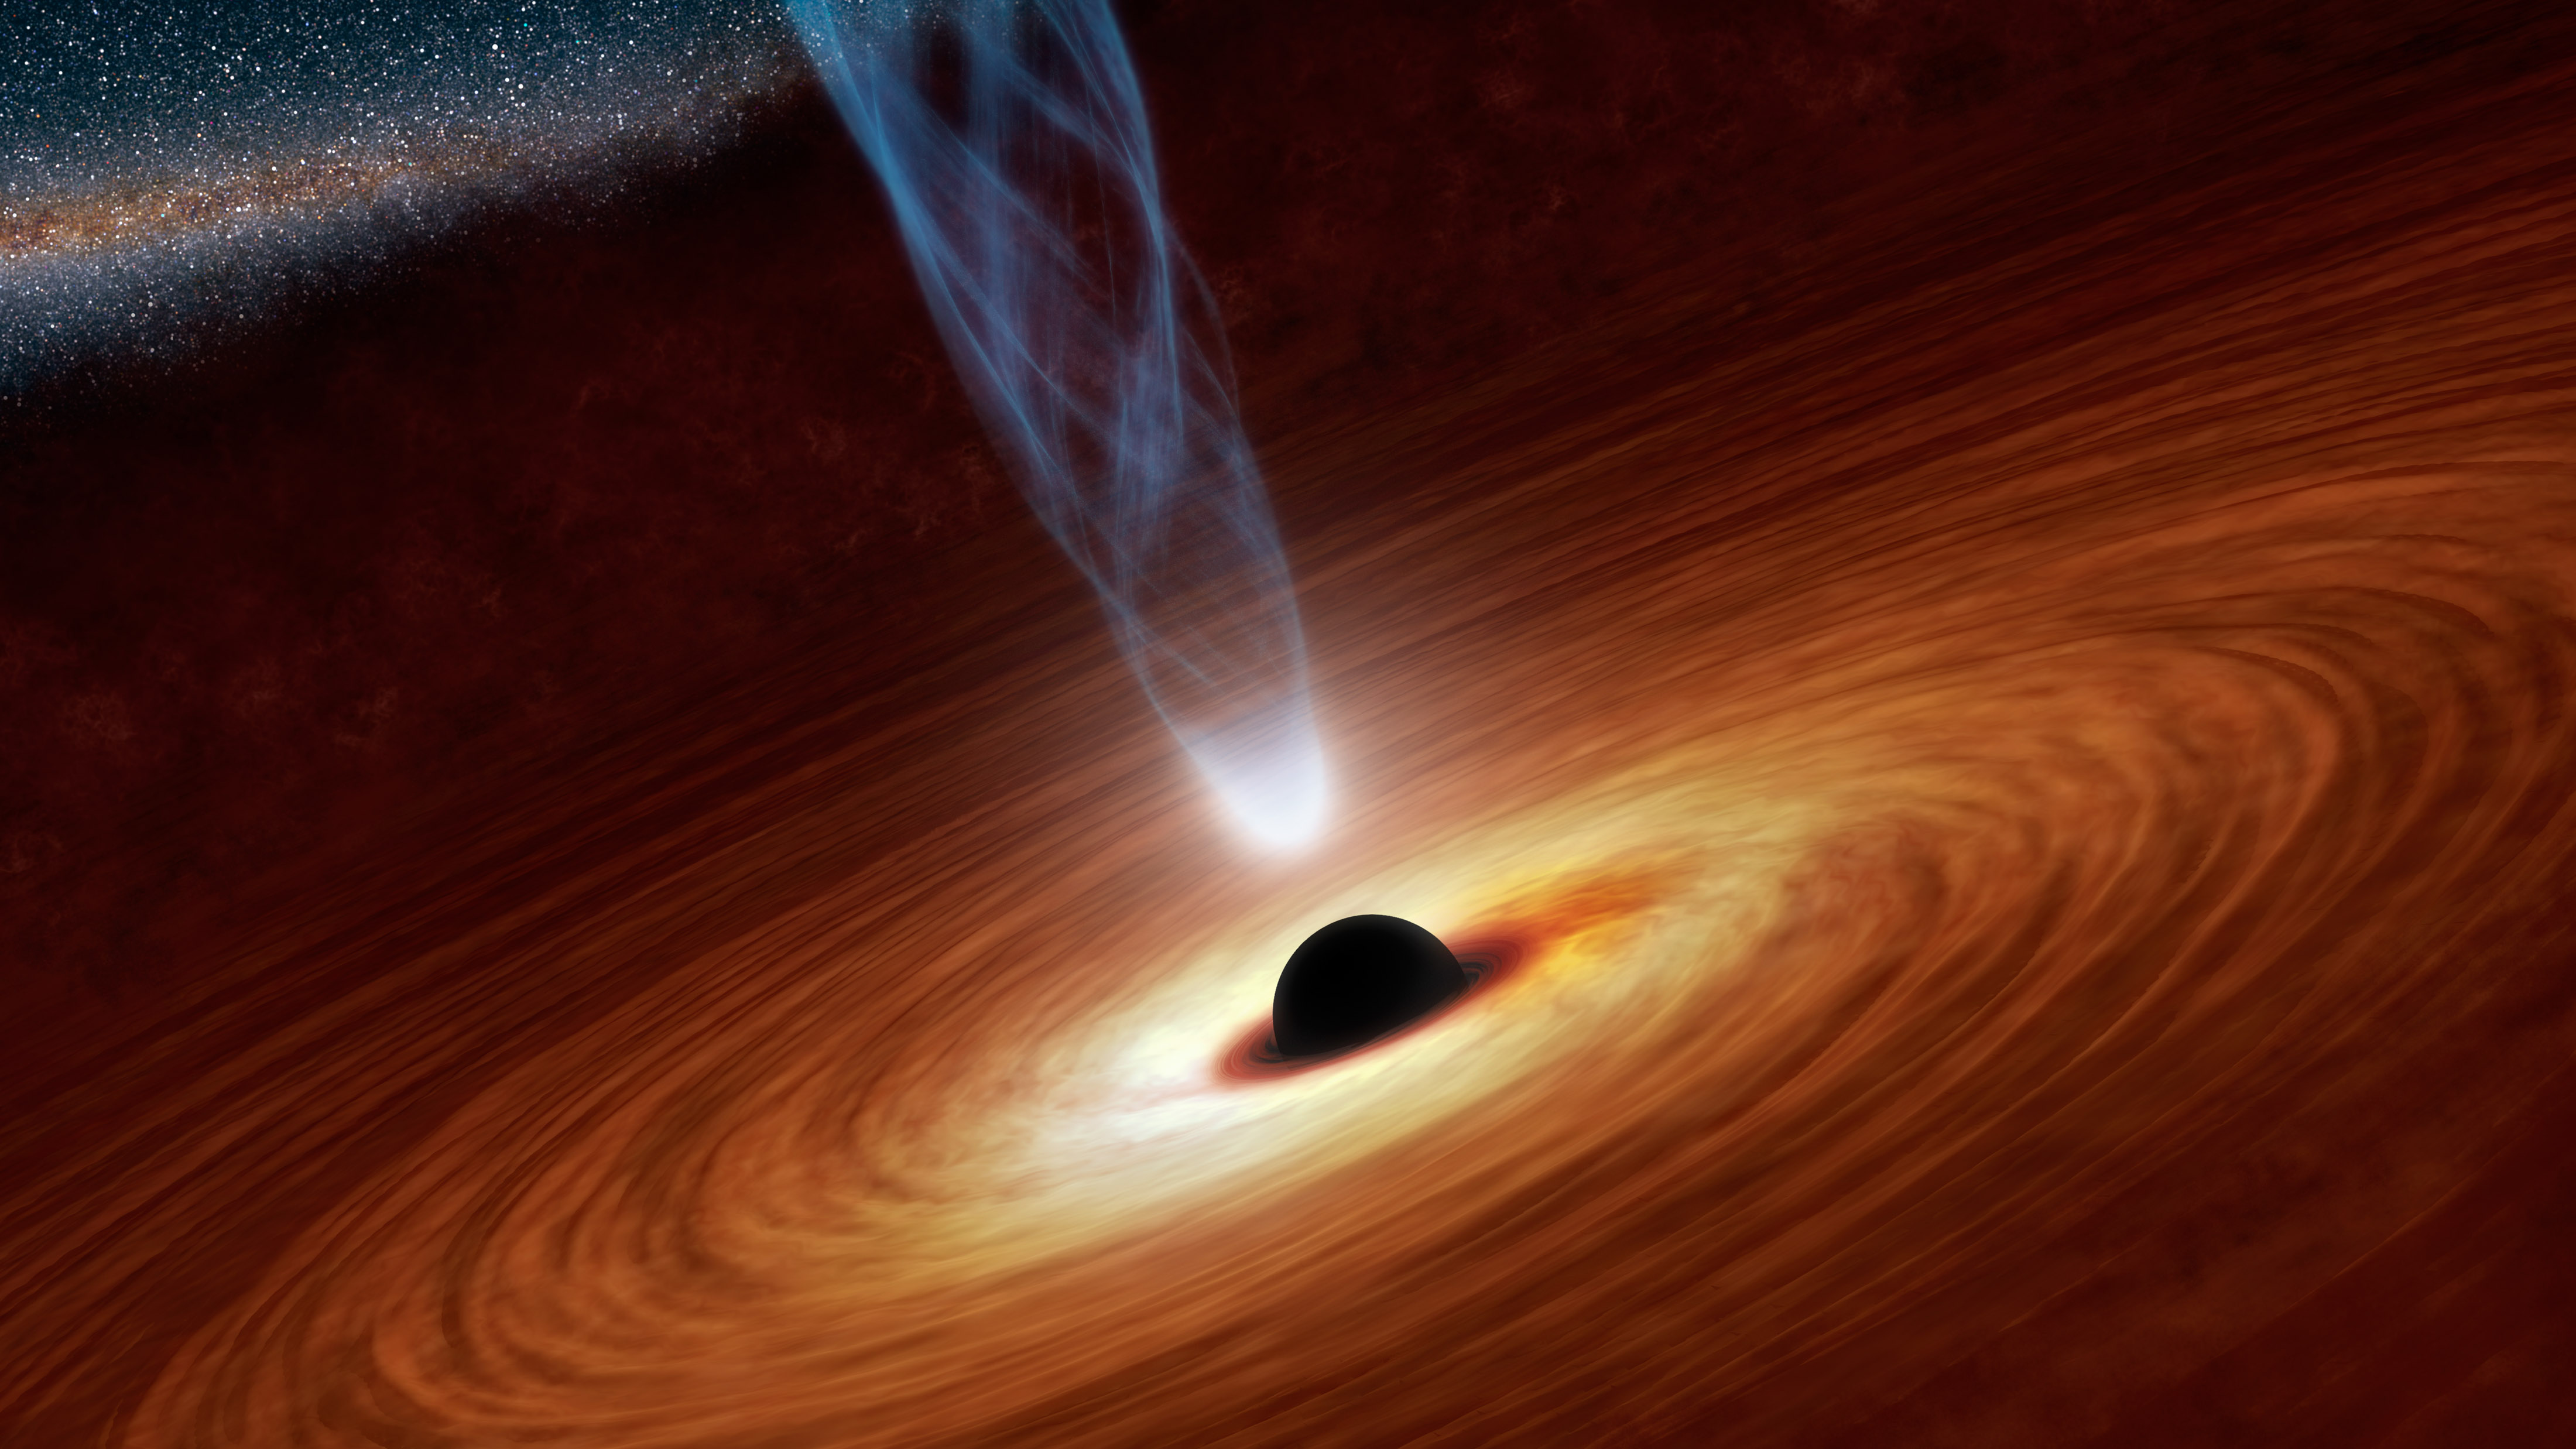 Planets orbiting black holes could be full of life